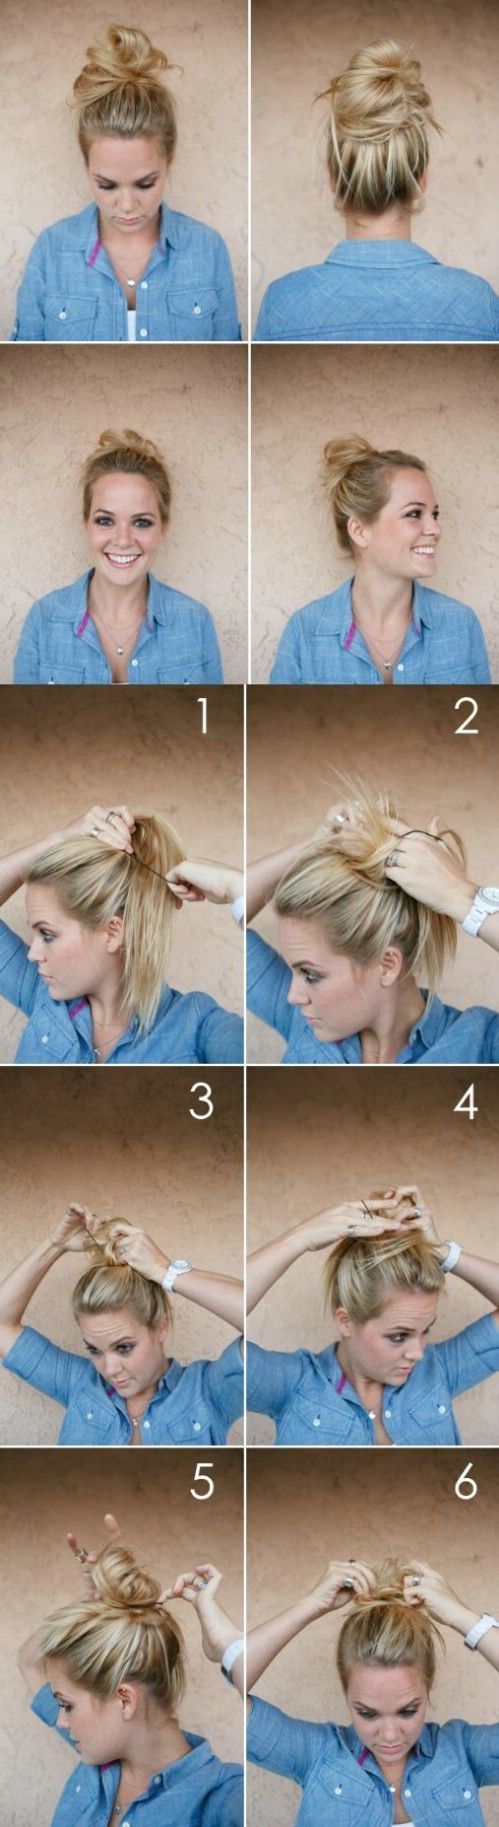 https://image.sistacafe.com/images/uploads/content_image/image/161703/1468554058-5-five-minute-hairstyle.jpg